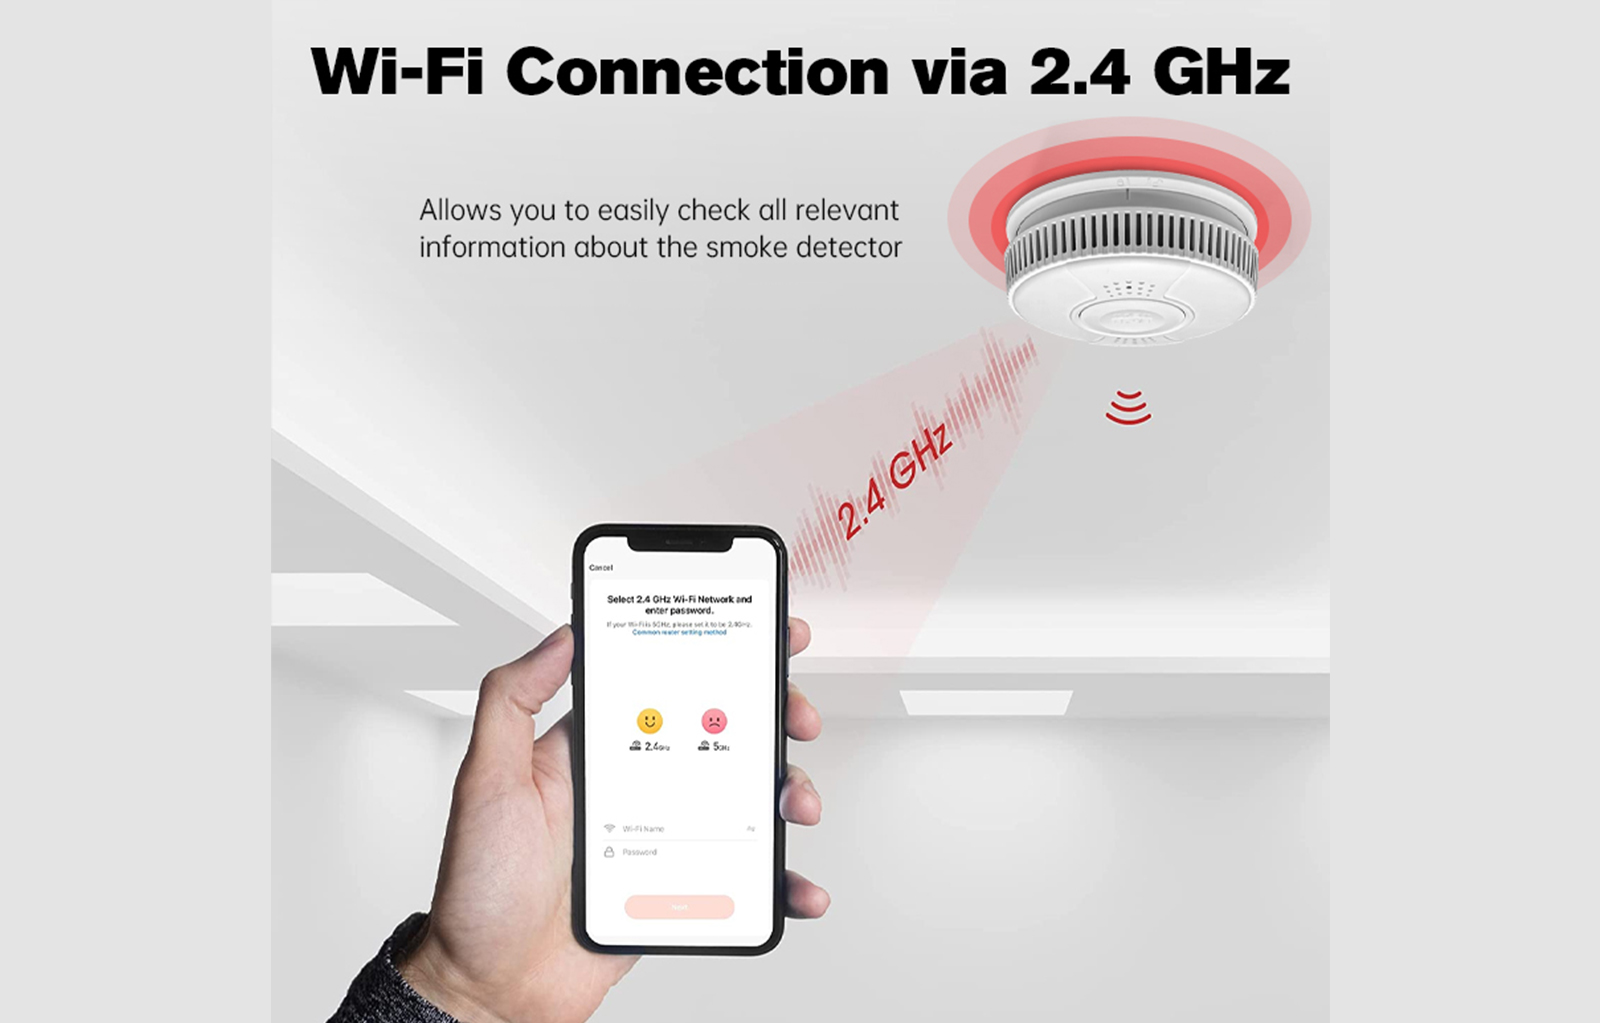 What are the advantages of smart smoke detector4gv